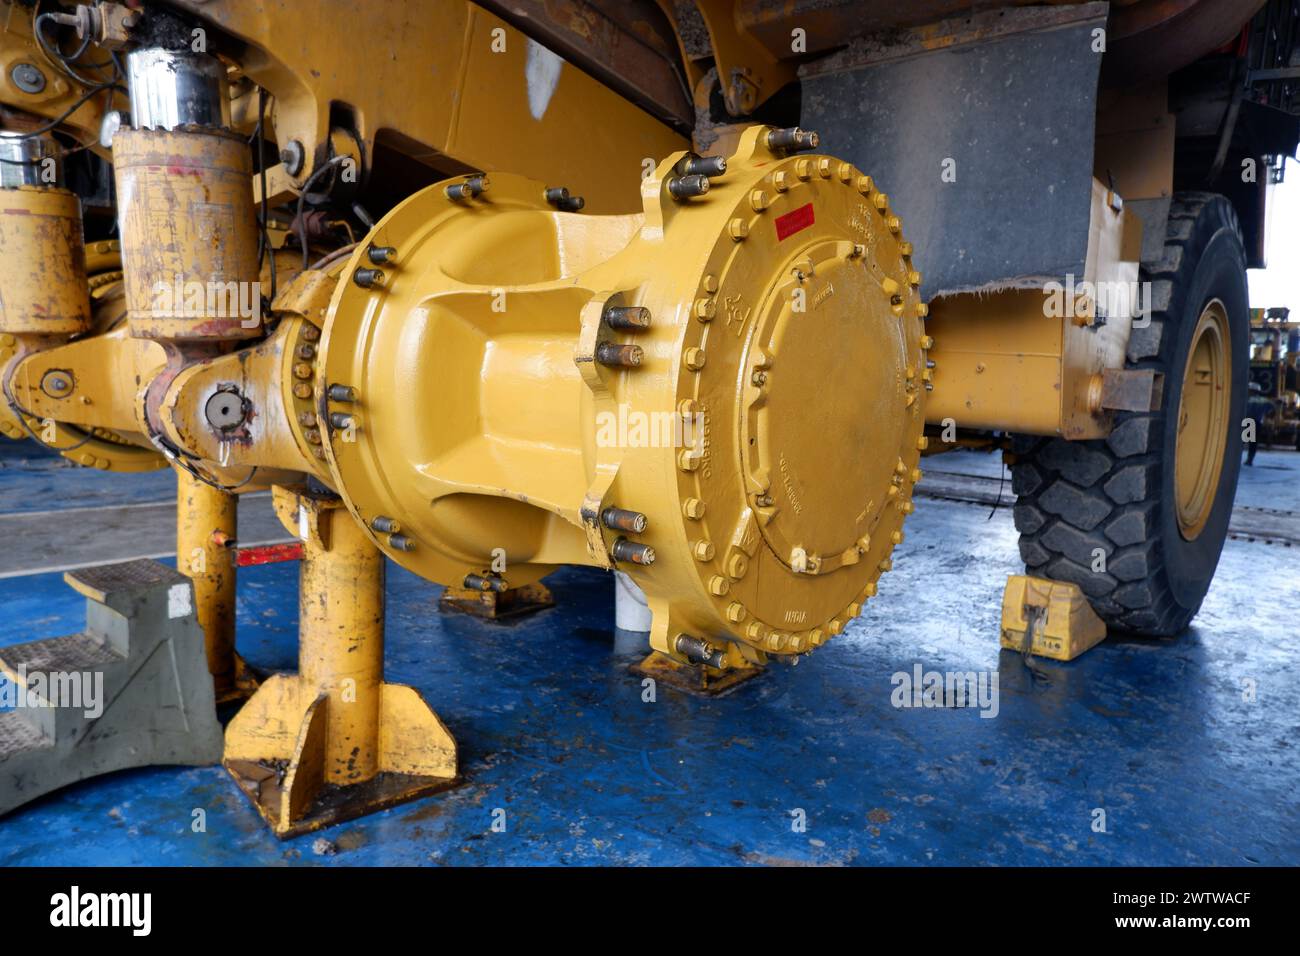 final drive and wheel hub of a giant mining dump truck being serviced at workshop Stock Photo